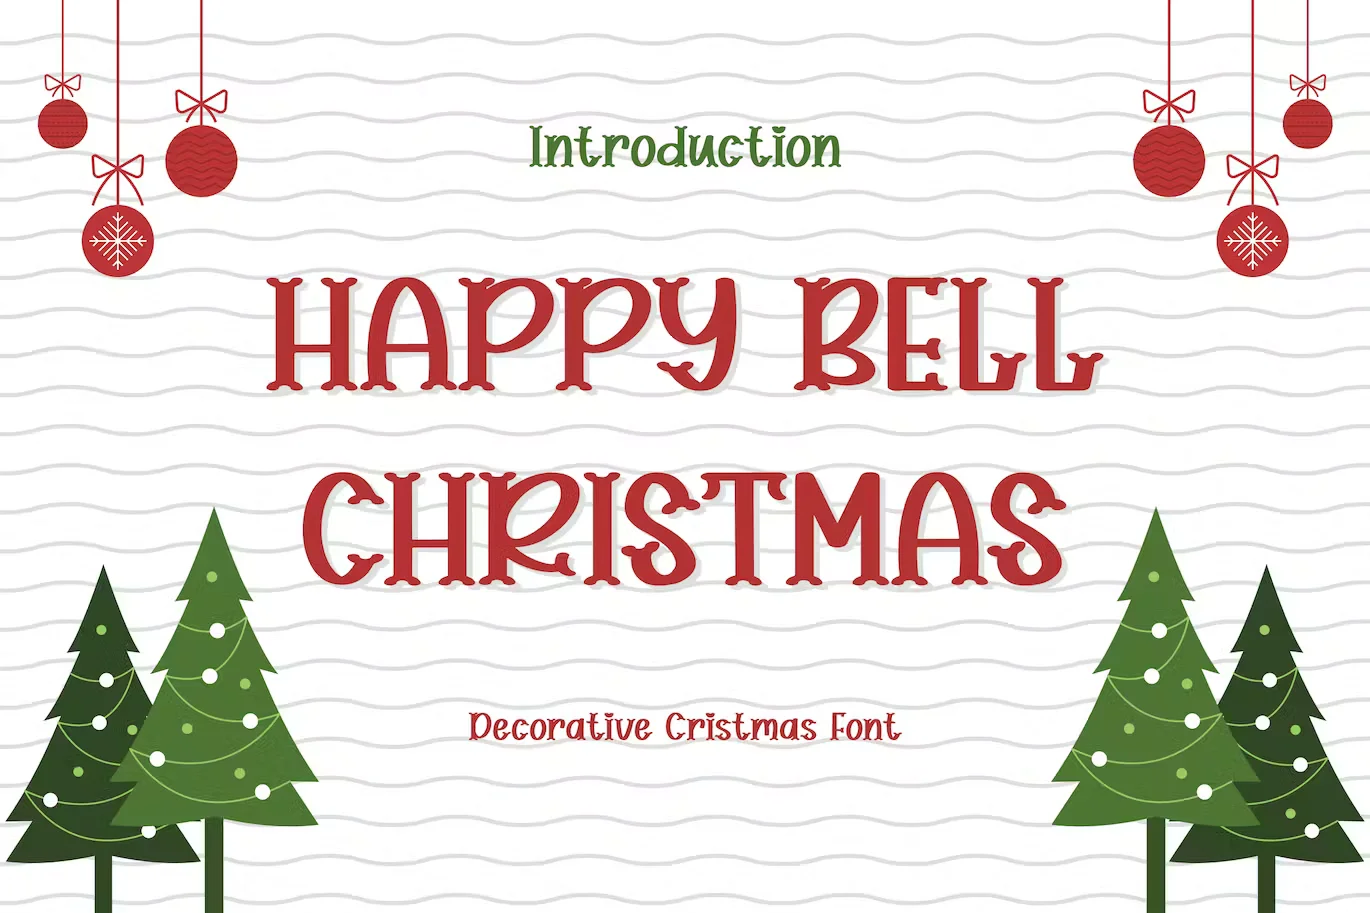 HAPPY BELL CHRISTMAS - Decorative Christmas Font